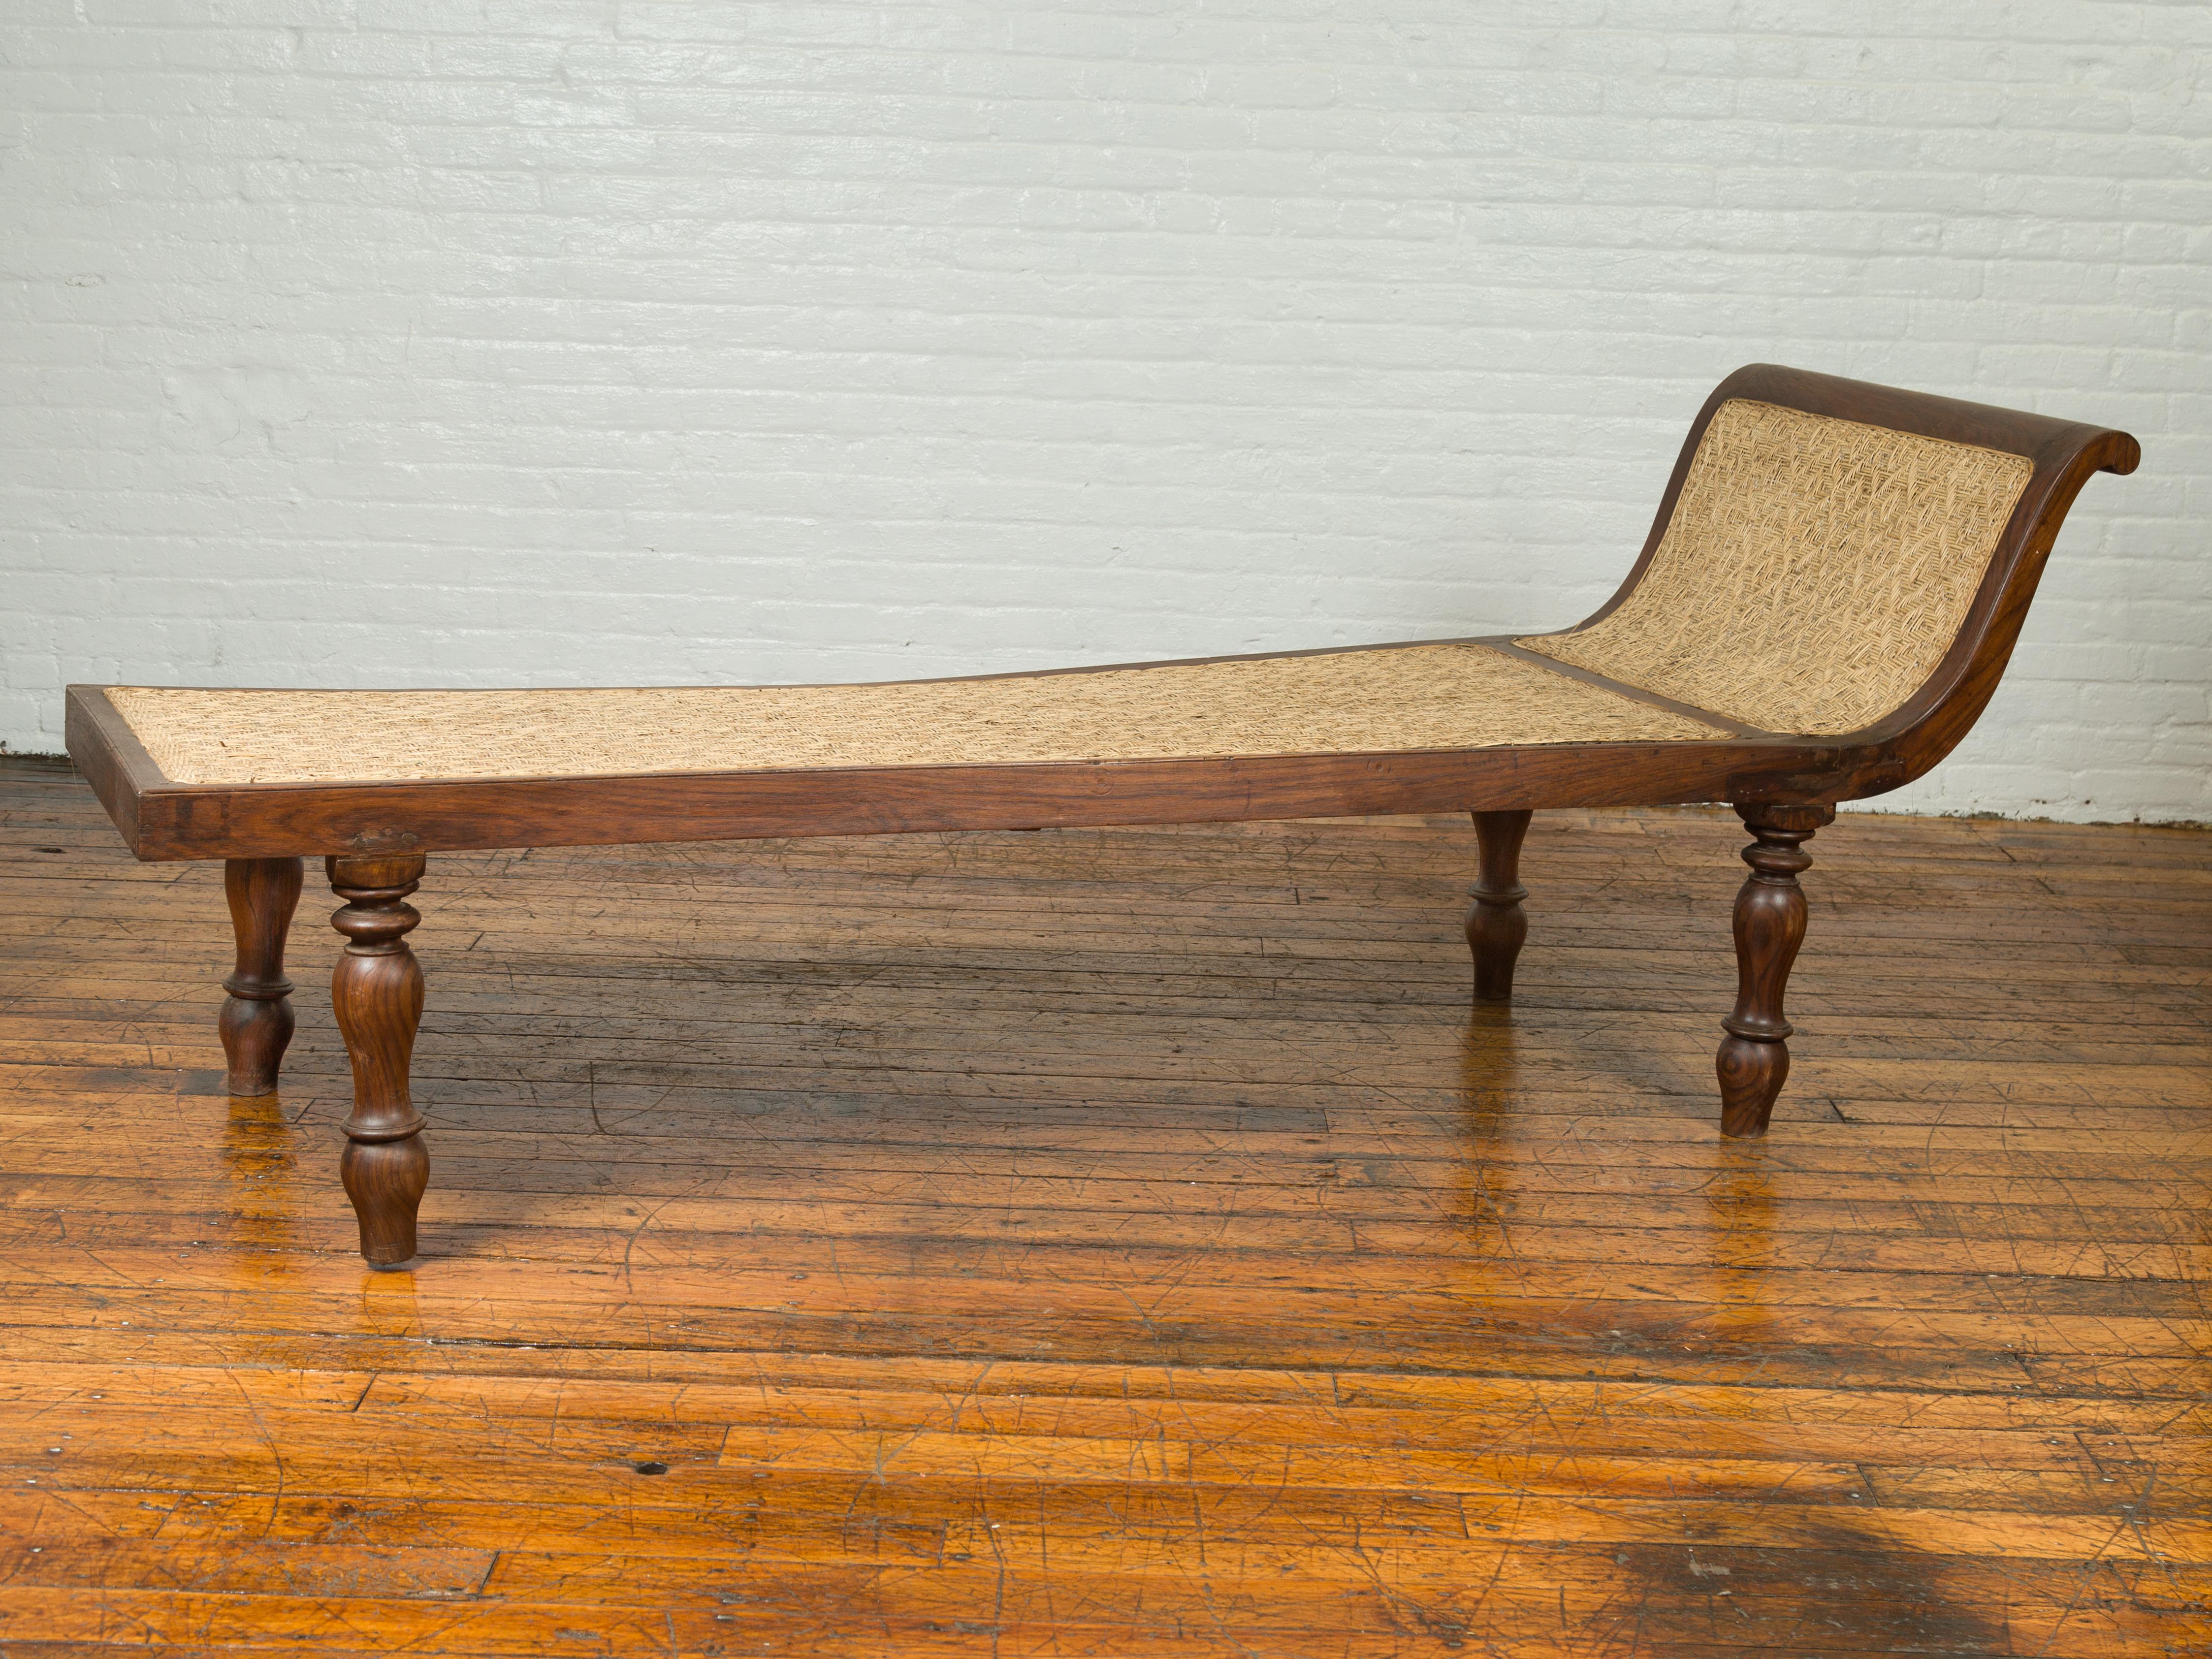 Indonesian Dutch Colonial Late 19th Century Teak Wood and Rattan Daybed with Turned Legs